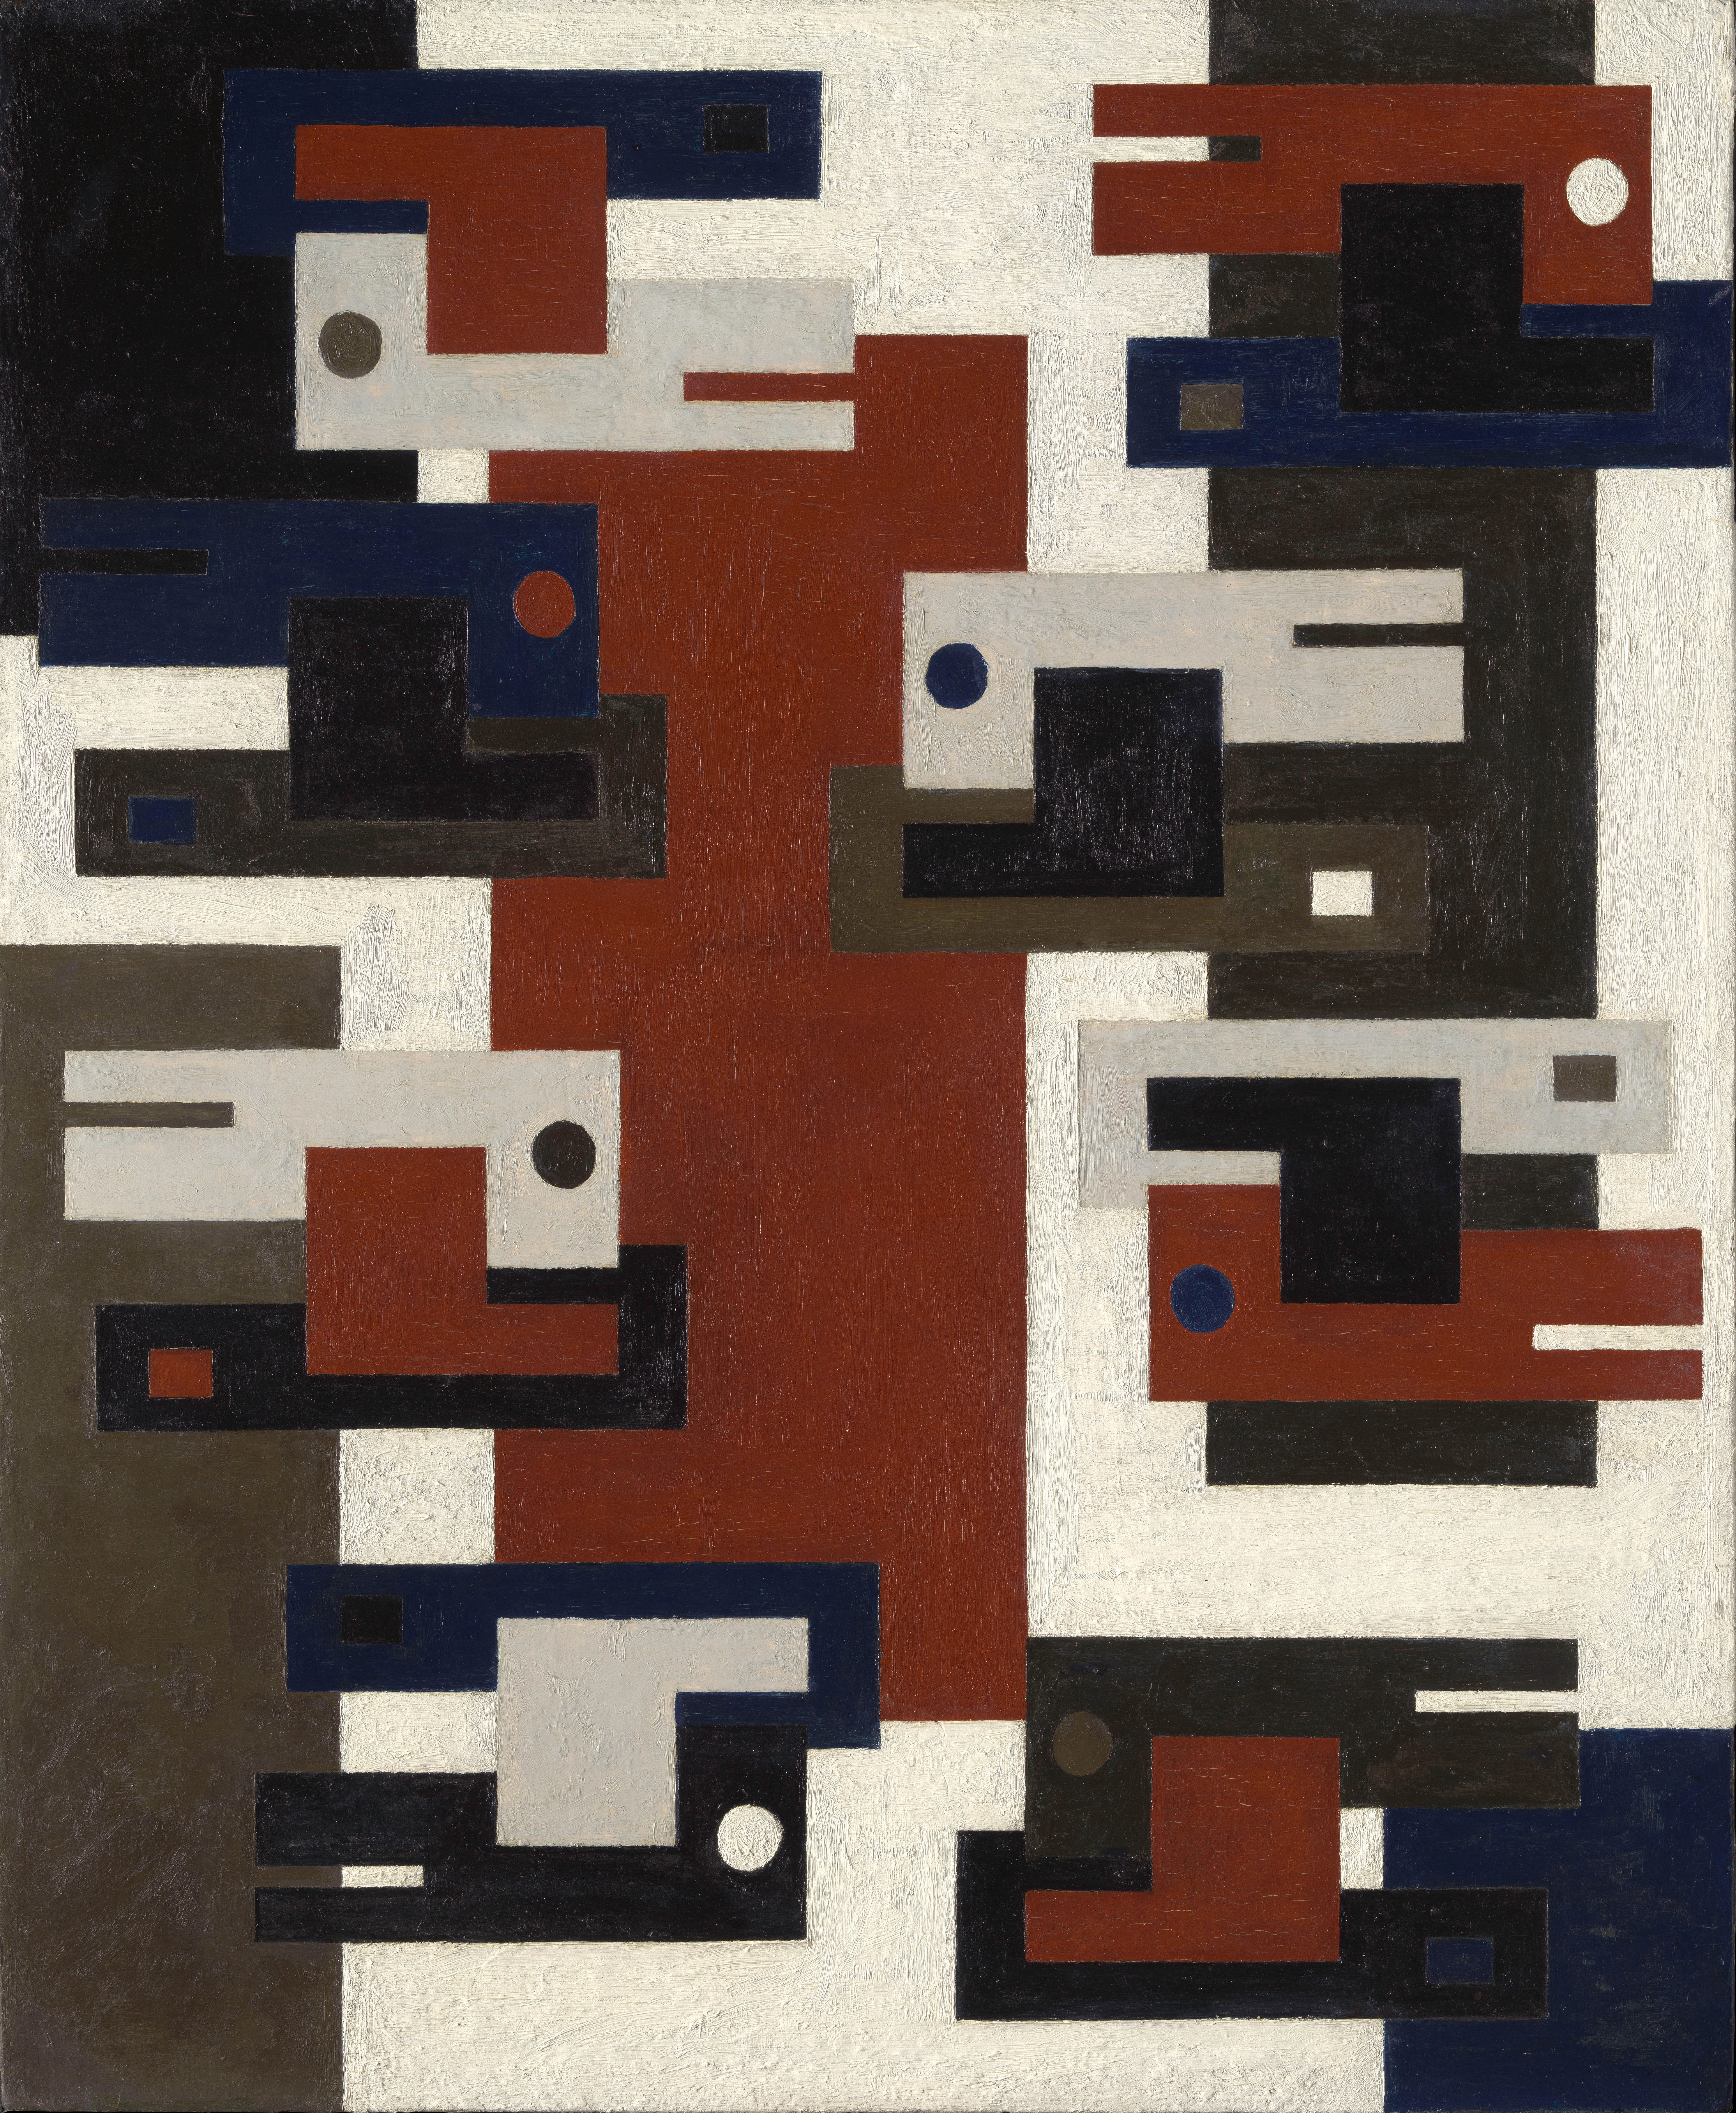 Abstract oil on canvas composition comprised of red, white, black, blue, and brown geometric shapes; small circles of these colors are punctuated throughout the composition.